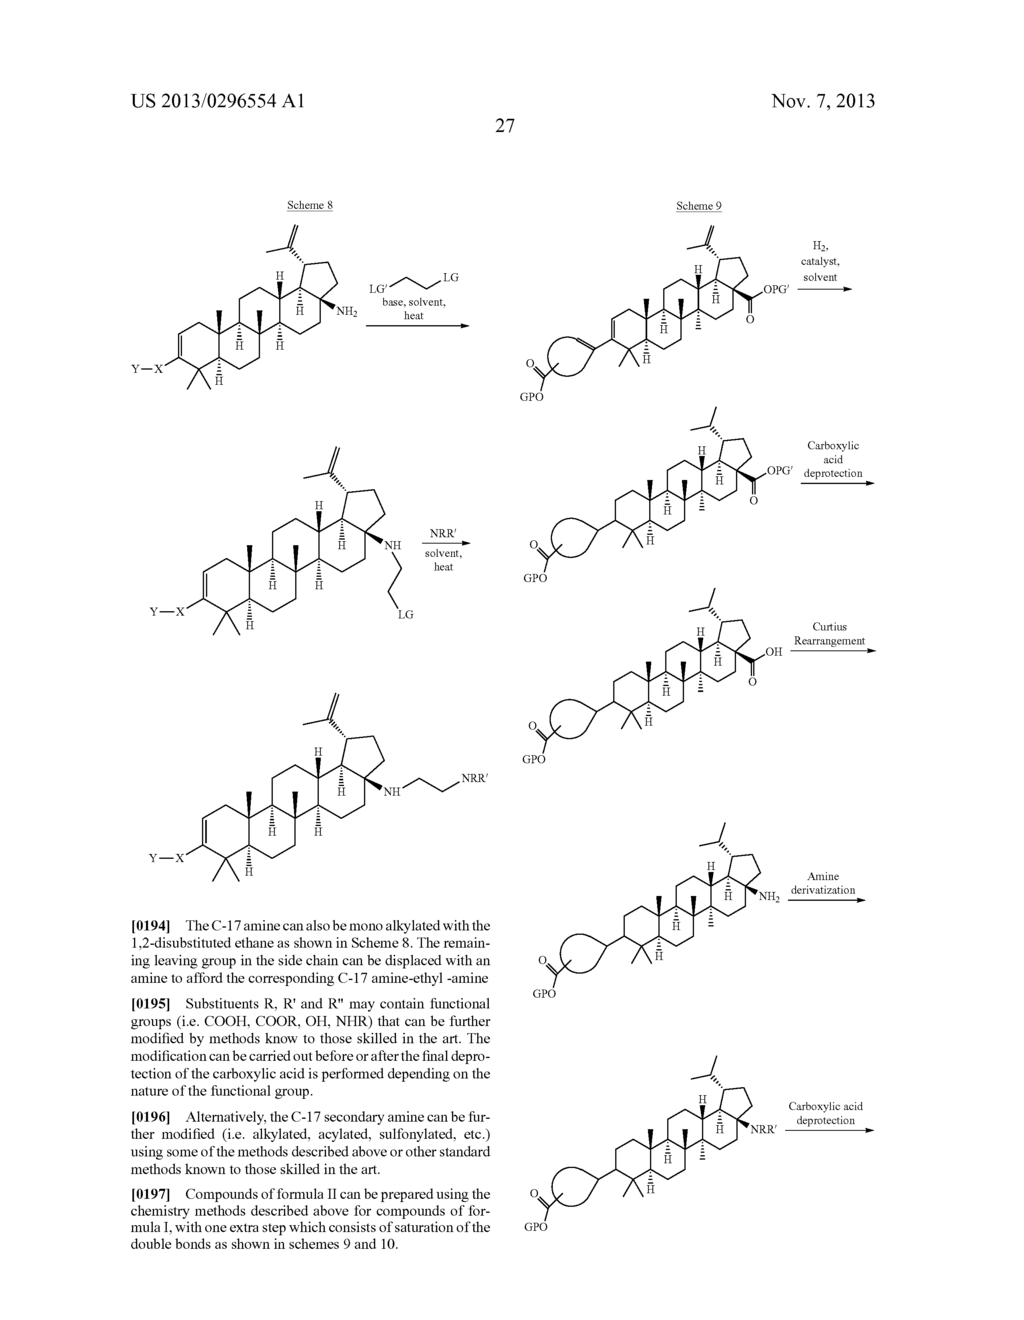 C-17 BICYCLIC AMINES OF TRITERPENOIDS WITH HIV MATURATION INHIBITORY     ACTIVITY - diagram, schematic, and image 28